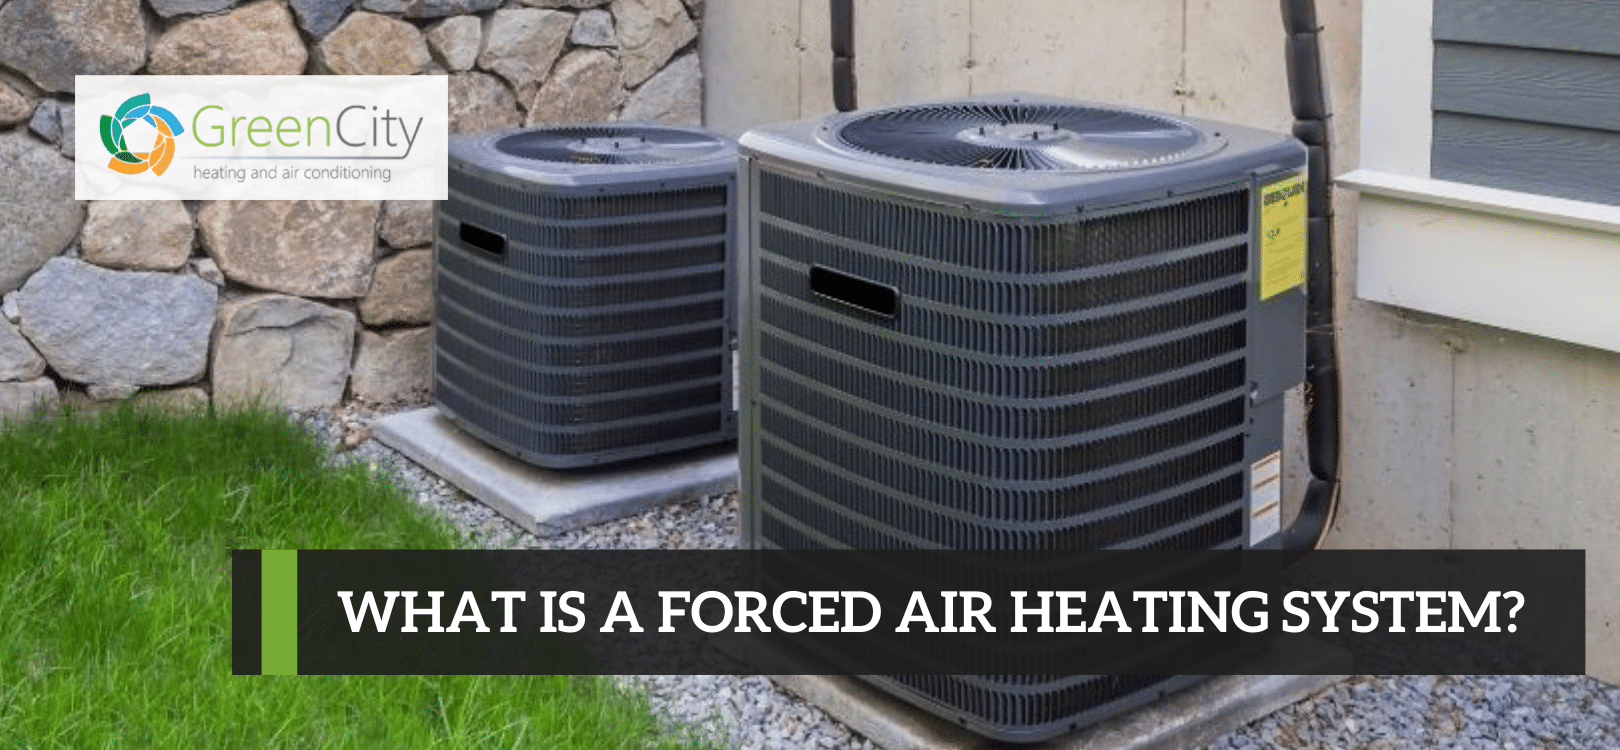 What is a Forced Air Heating System